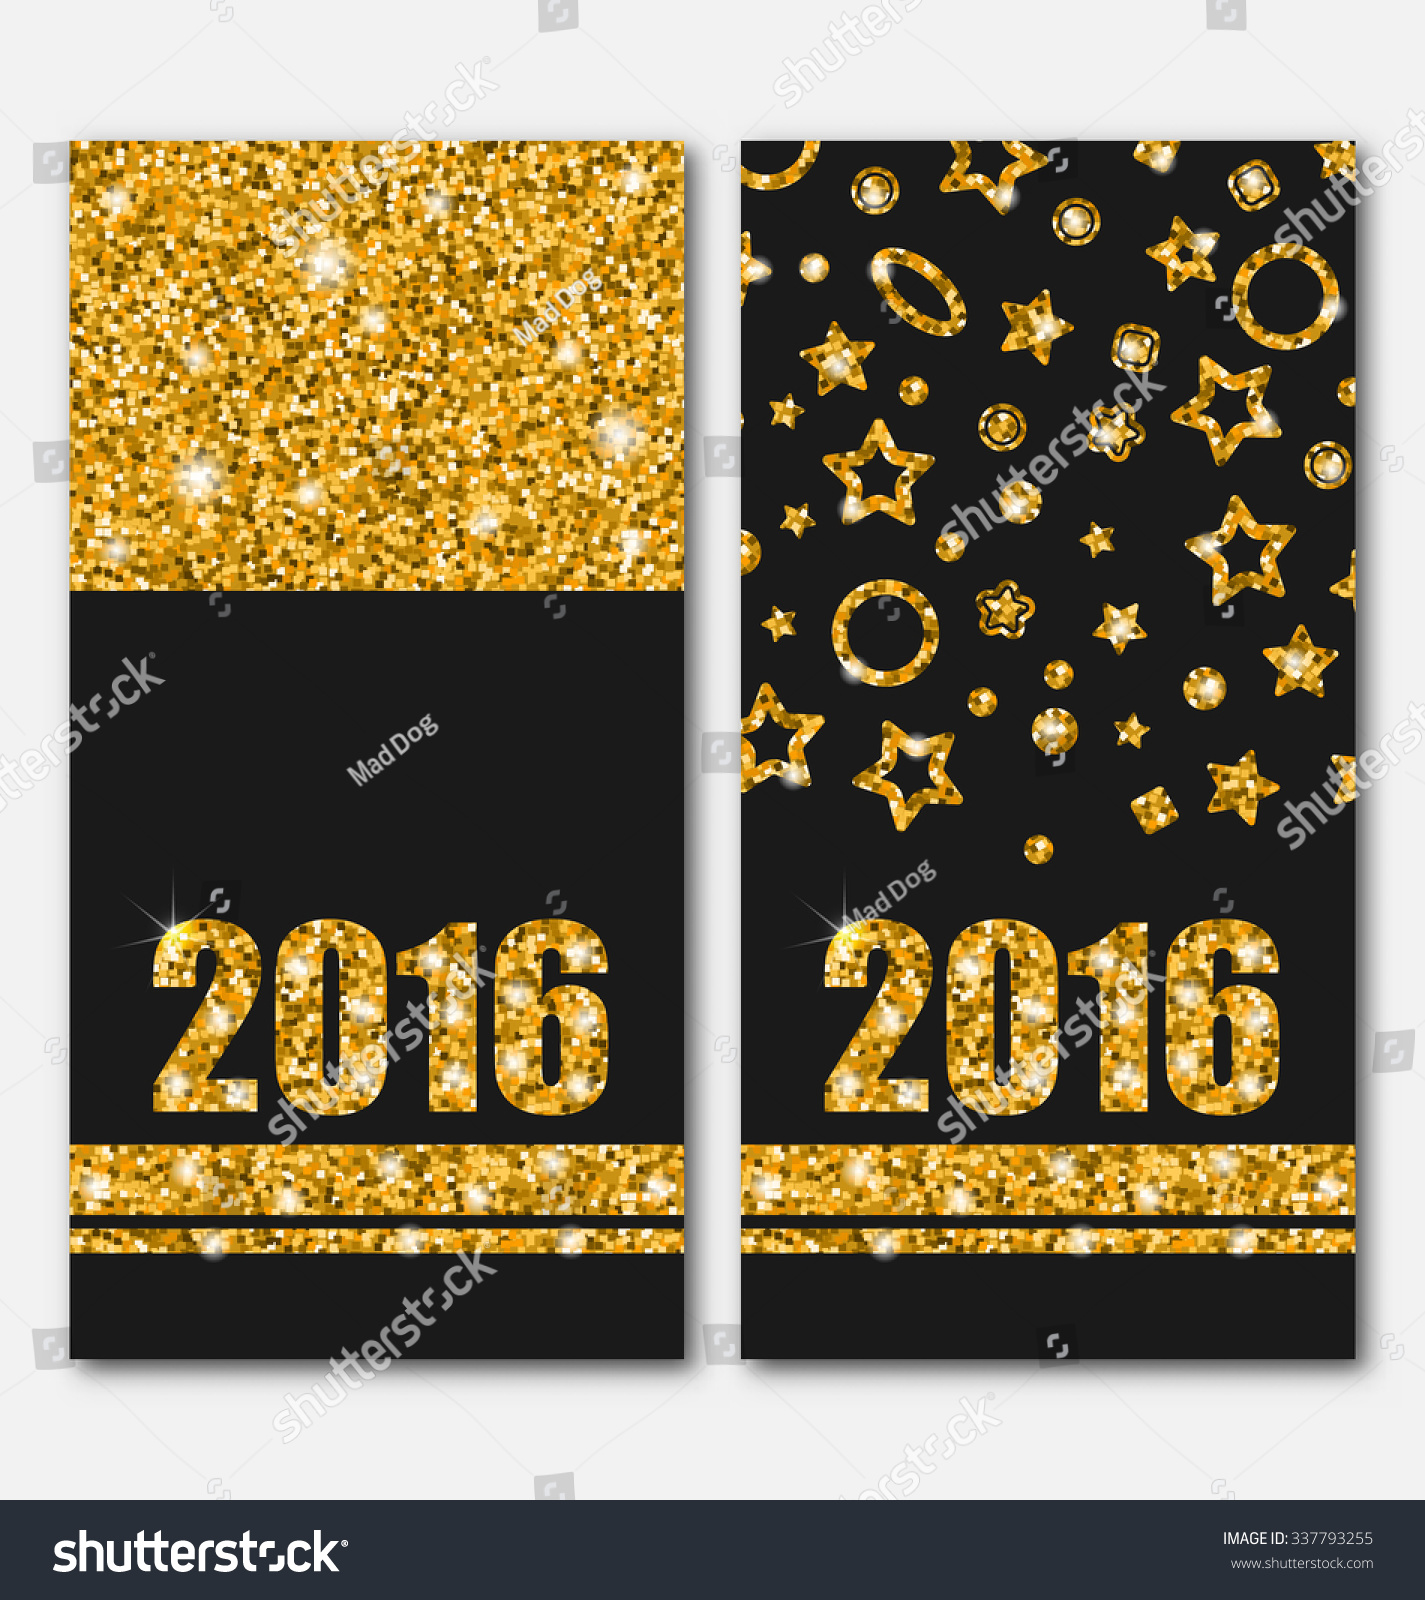 Illustration Shiny Vertical Banners with Lights and Sparkles for Happy New Year 2016 - raster #337793255